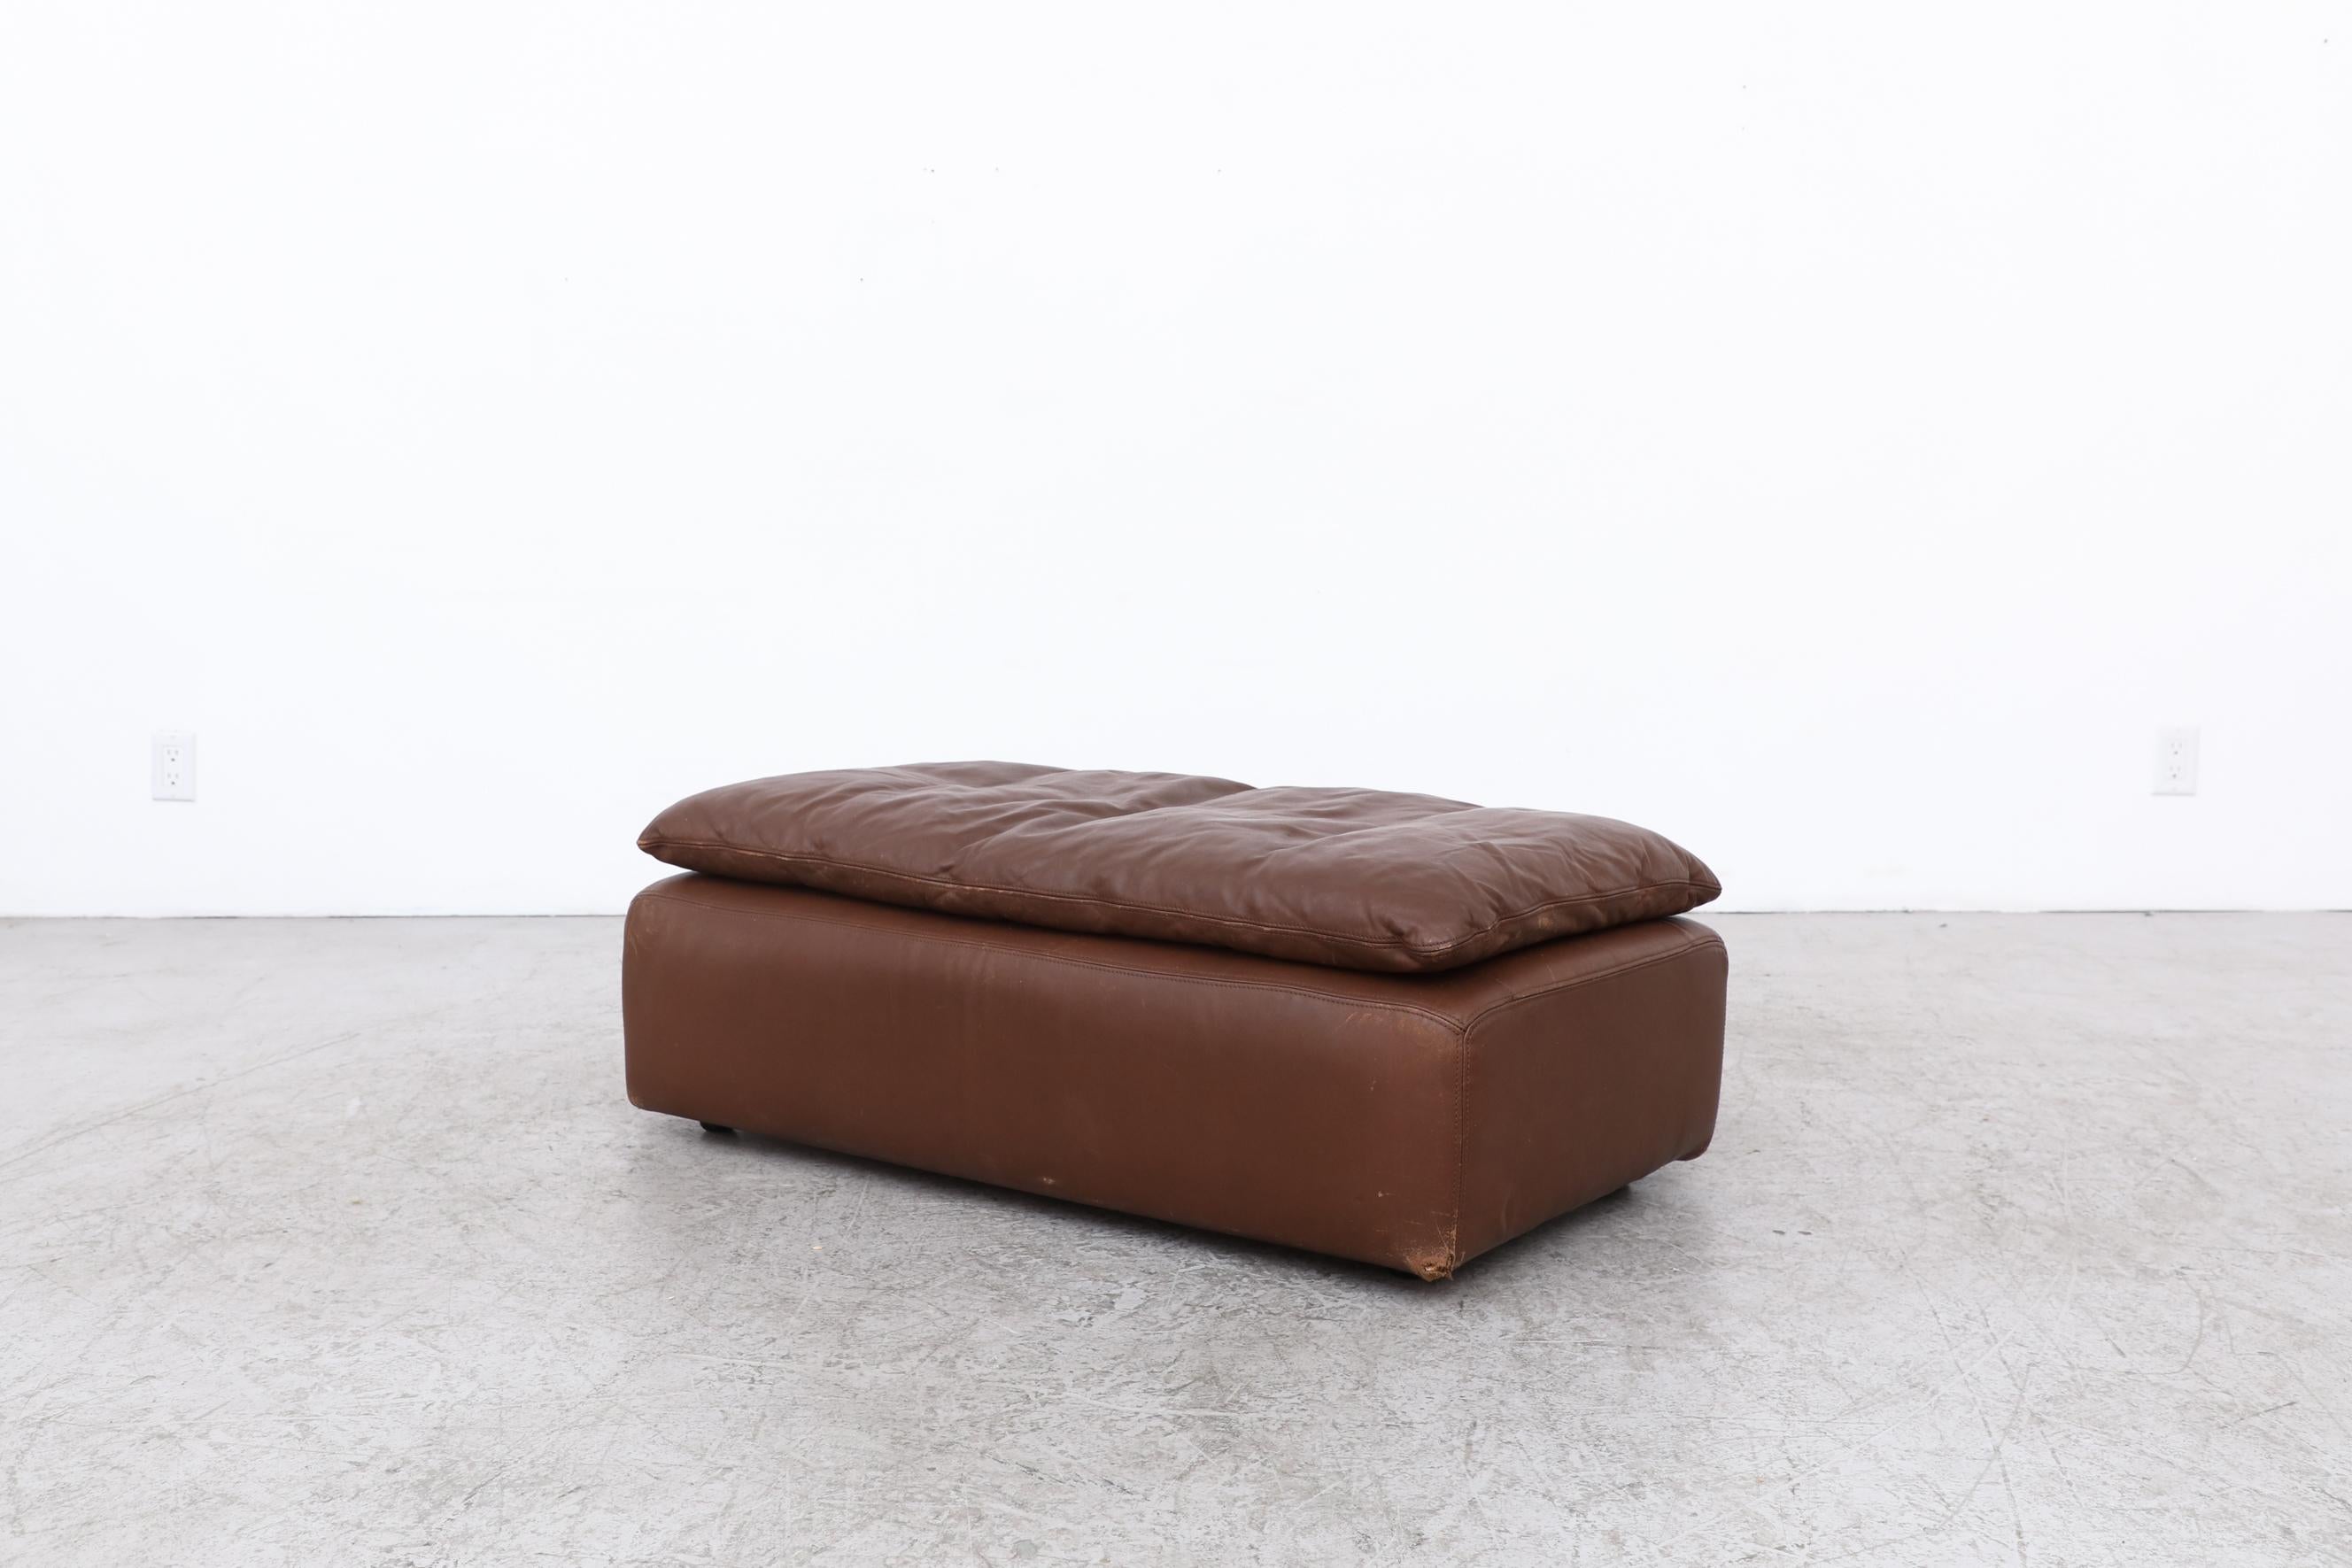 Extra wide Gelderland chocolate brown leather ottoman with a top cushion. In original condition with visible wear and scratching as well as a small tear on the bottom corner. Wear is consistent with its age and use.